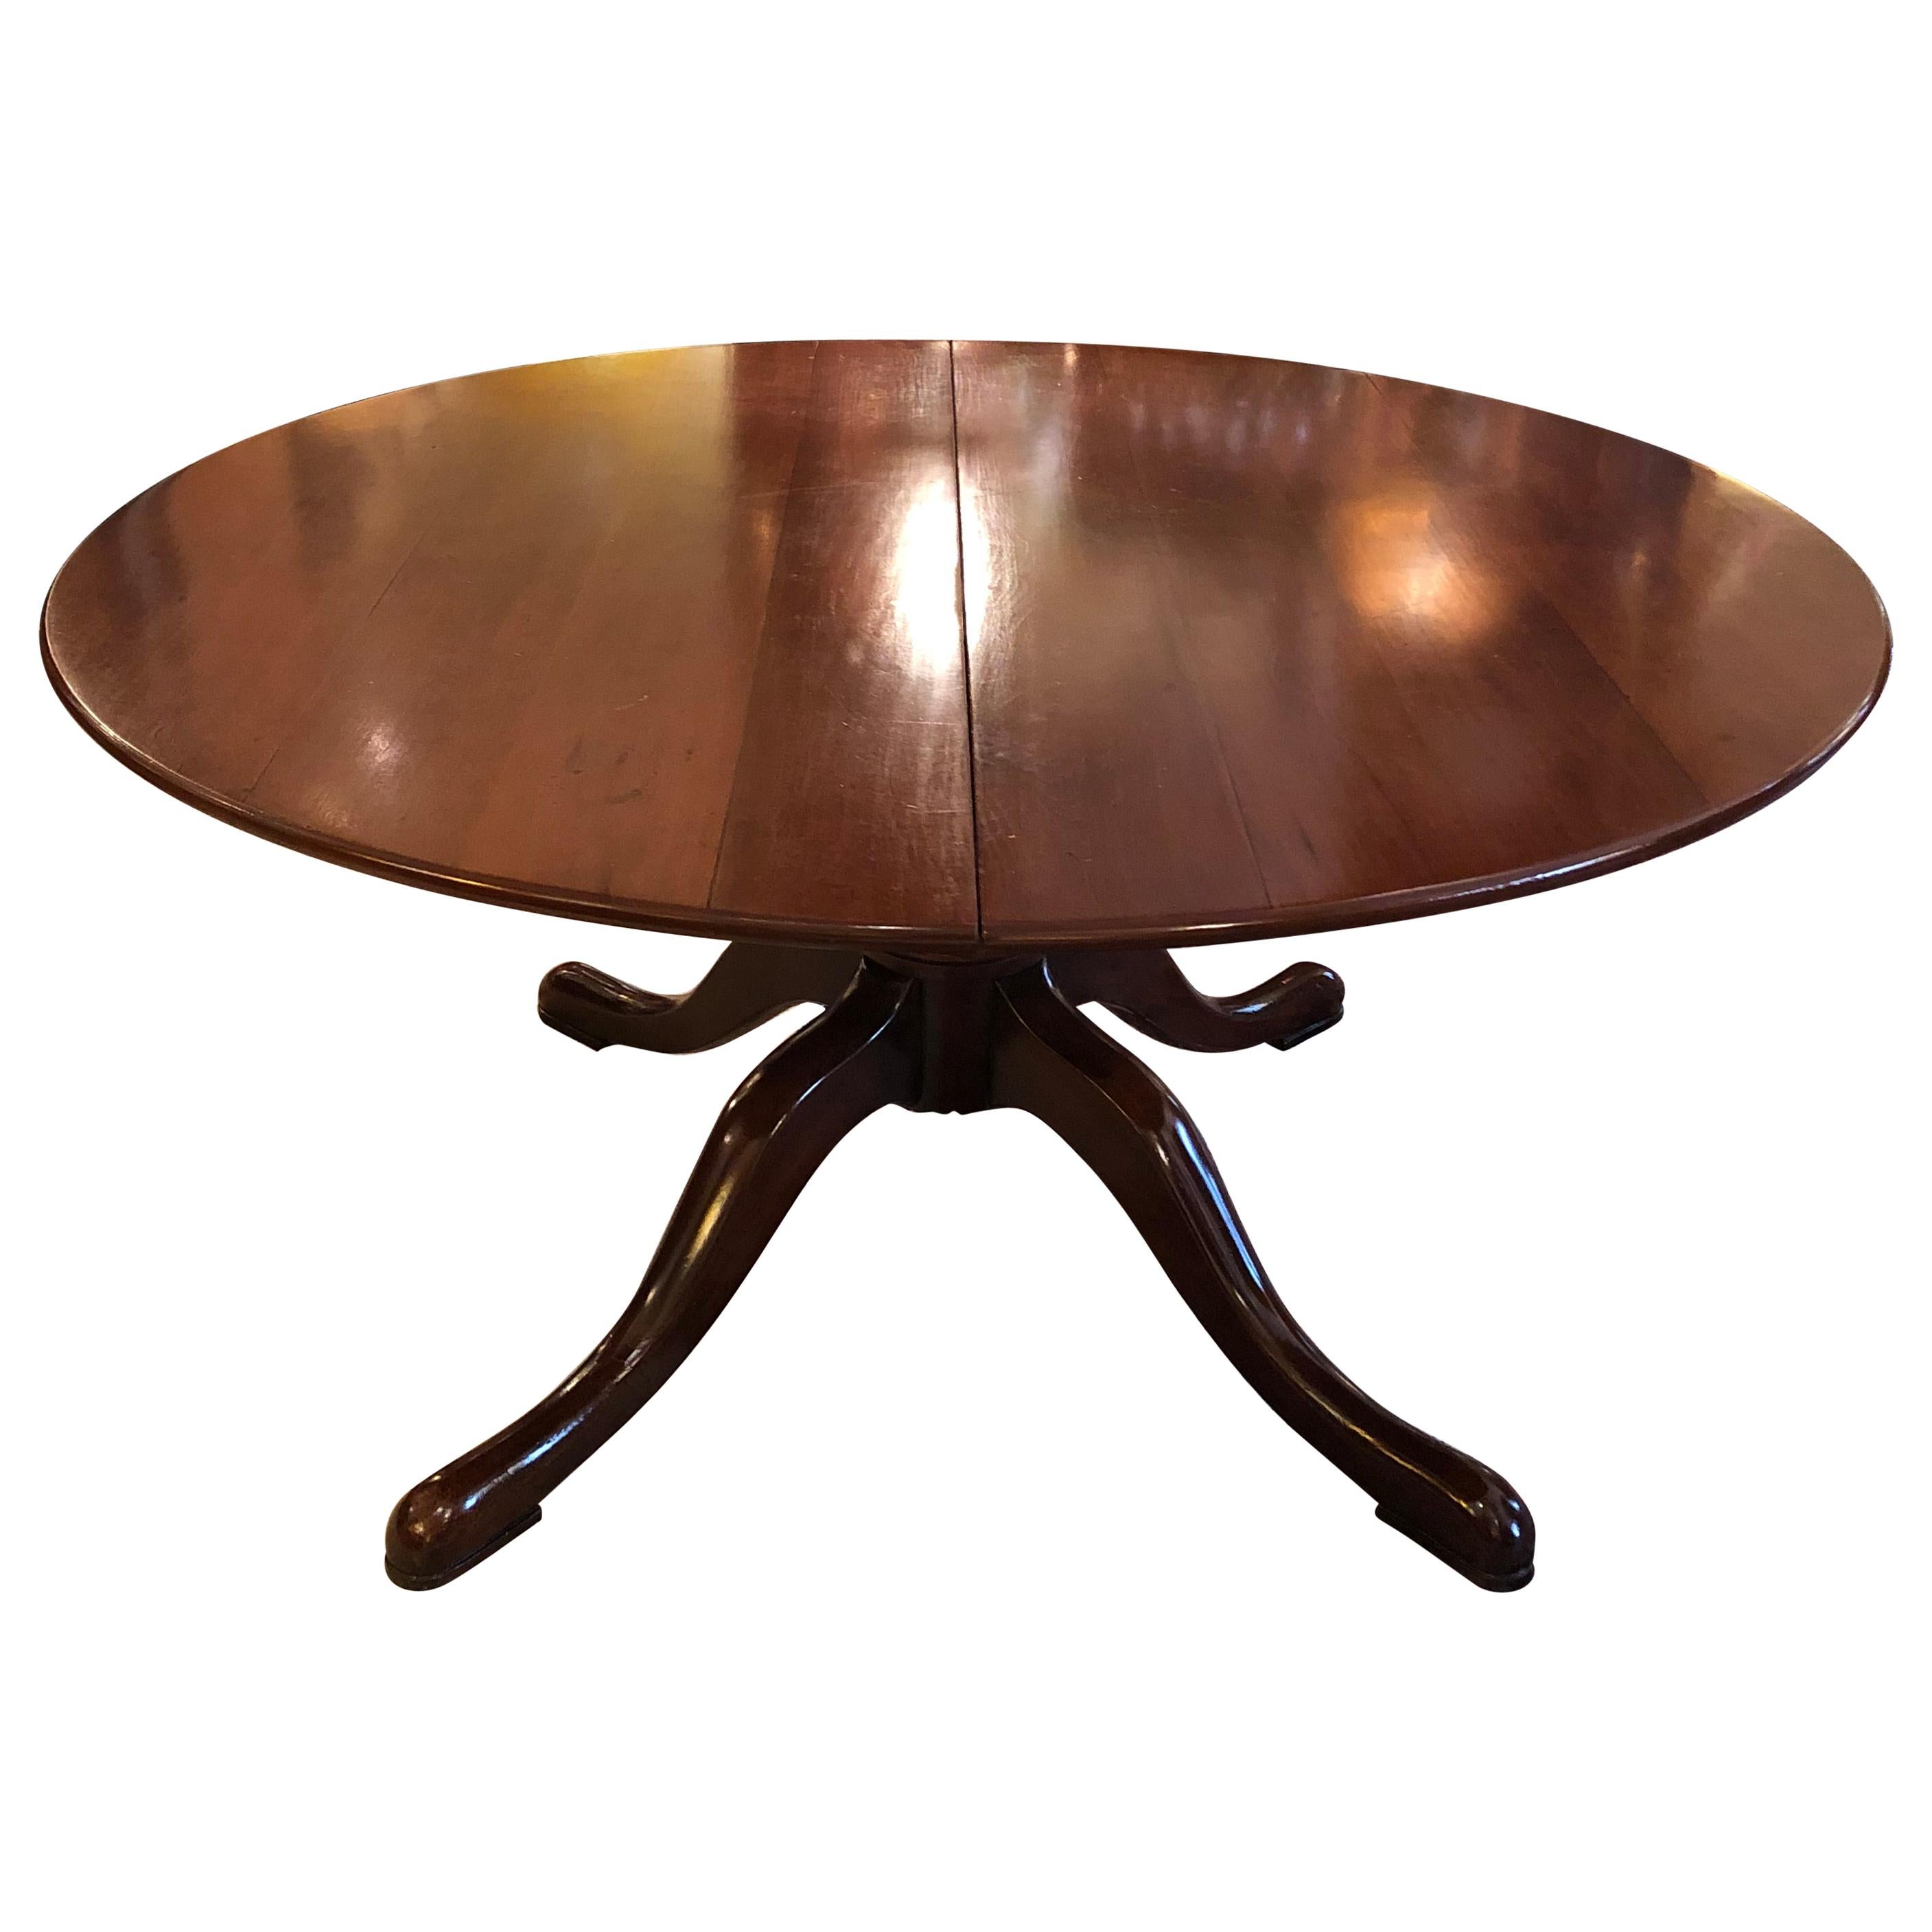 Classic Traditional Round Cherry Dining Table Extending to Large Oval